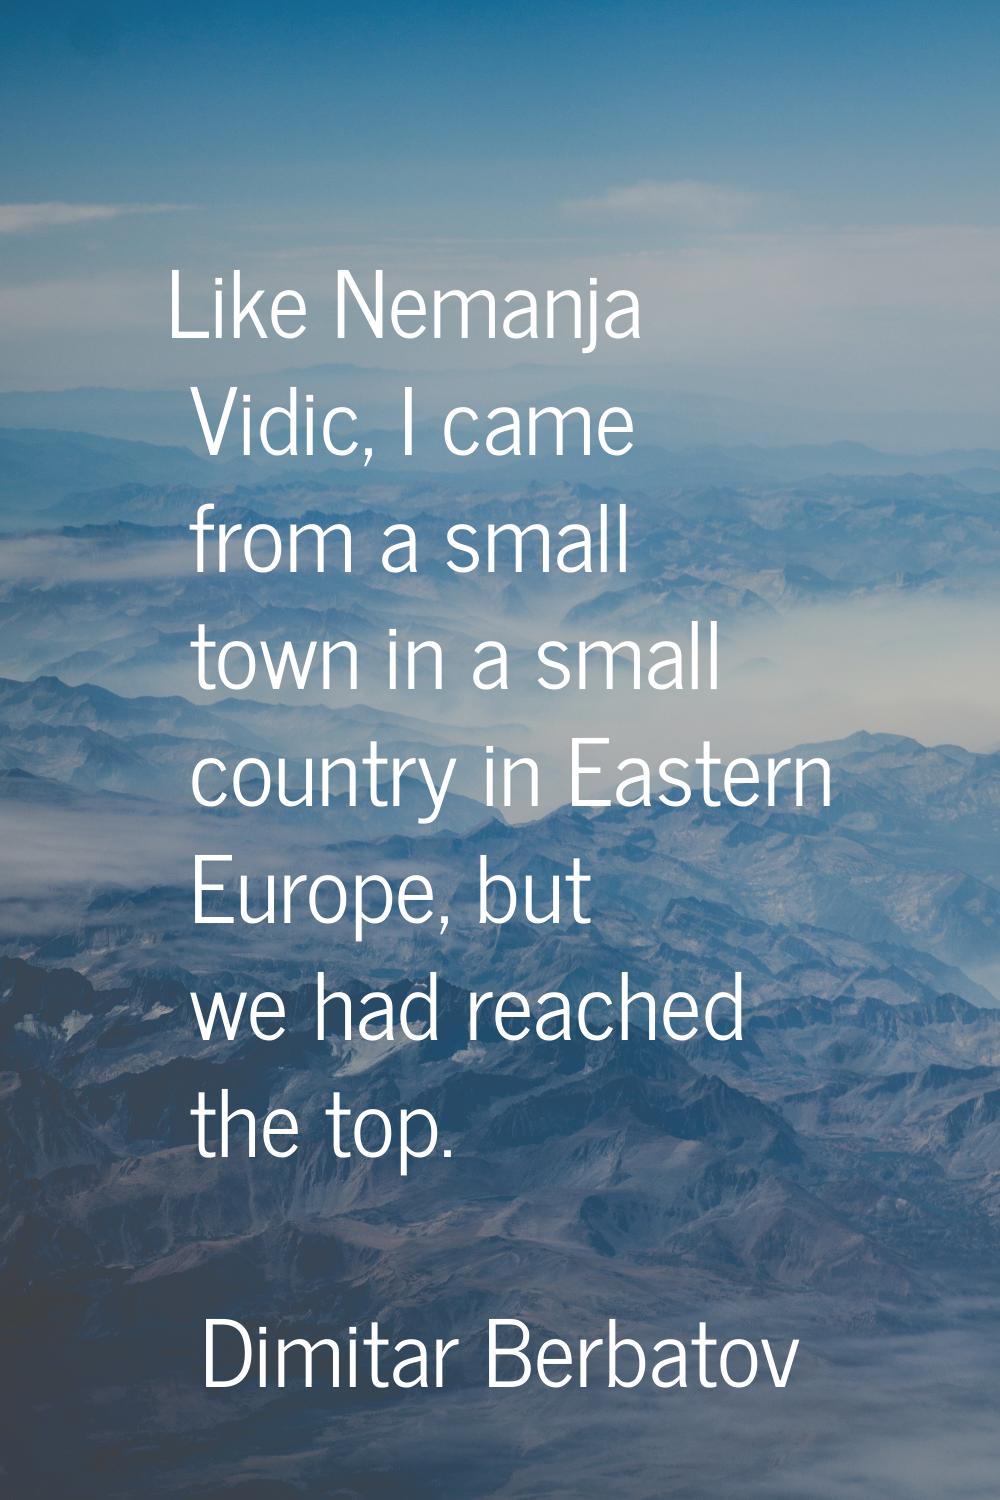 Like Nemanja Vidic, I came from a small town in a small country in Eastern Europe, but we had reach